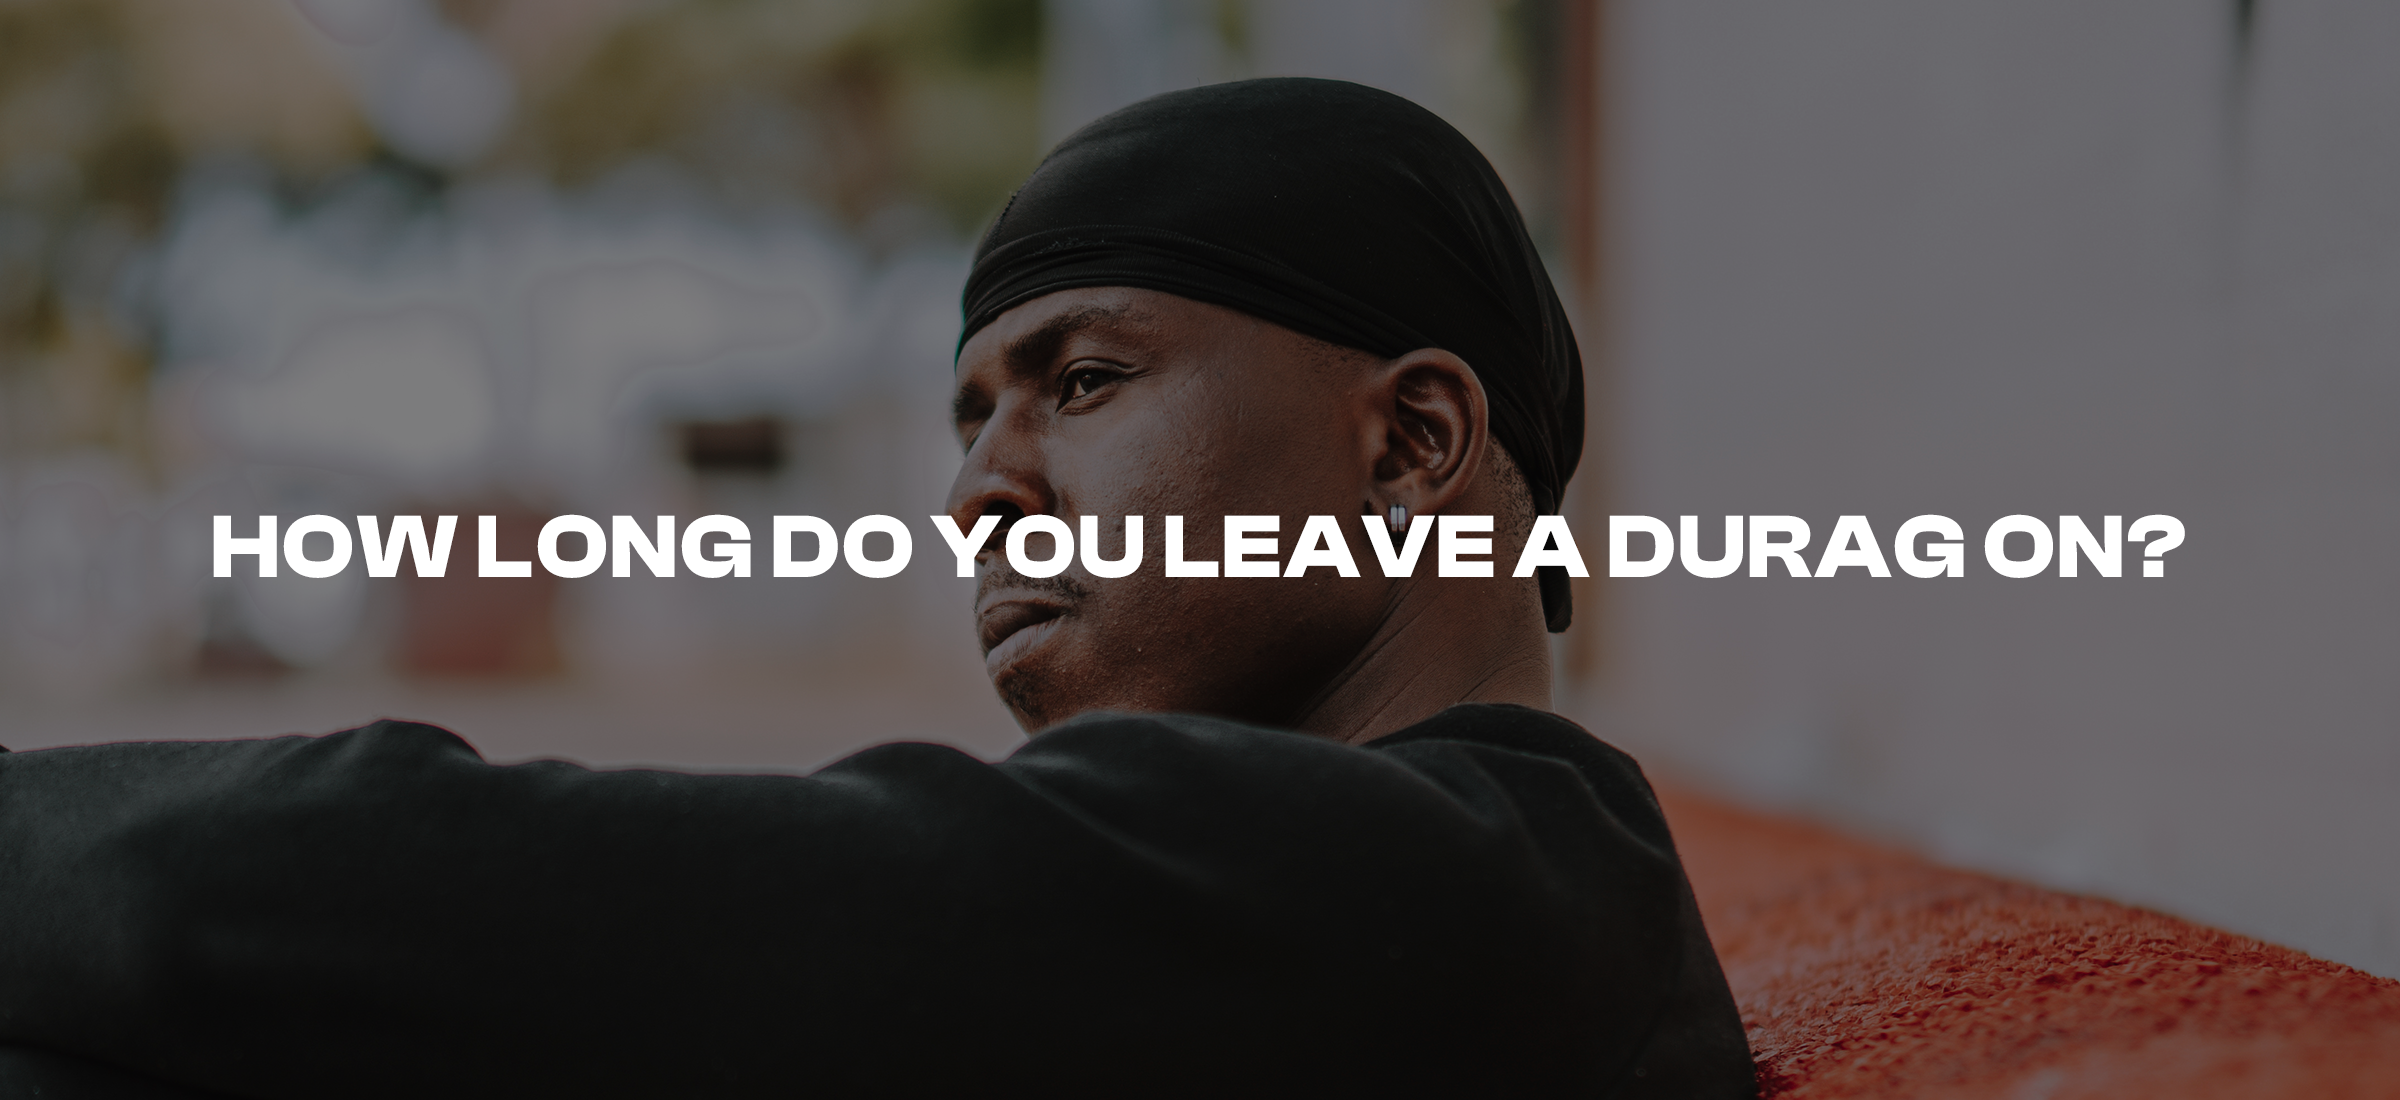 How Long Do You Leave a Durag On? A Guide to Durag Wearing Time